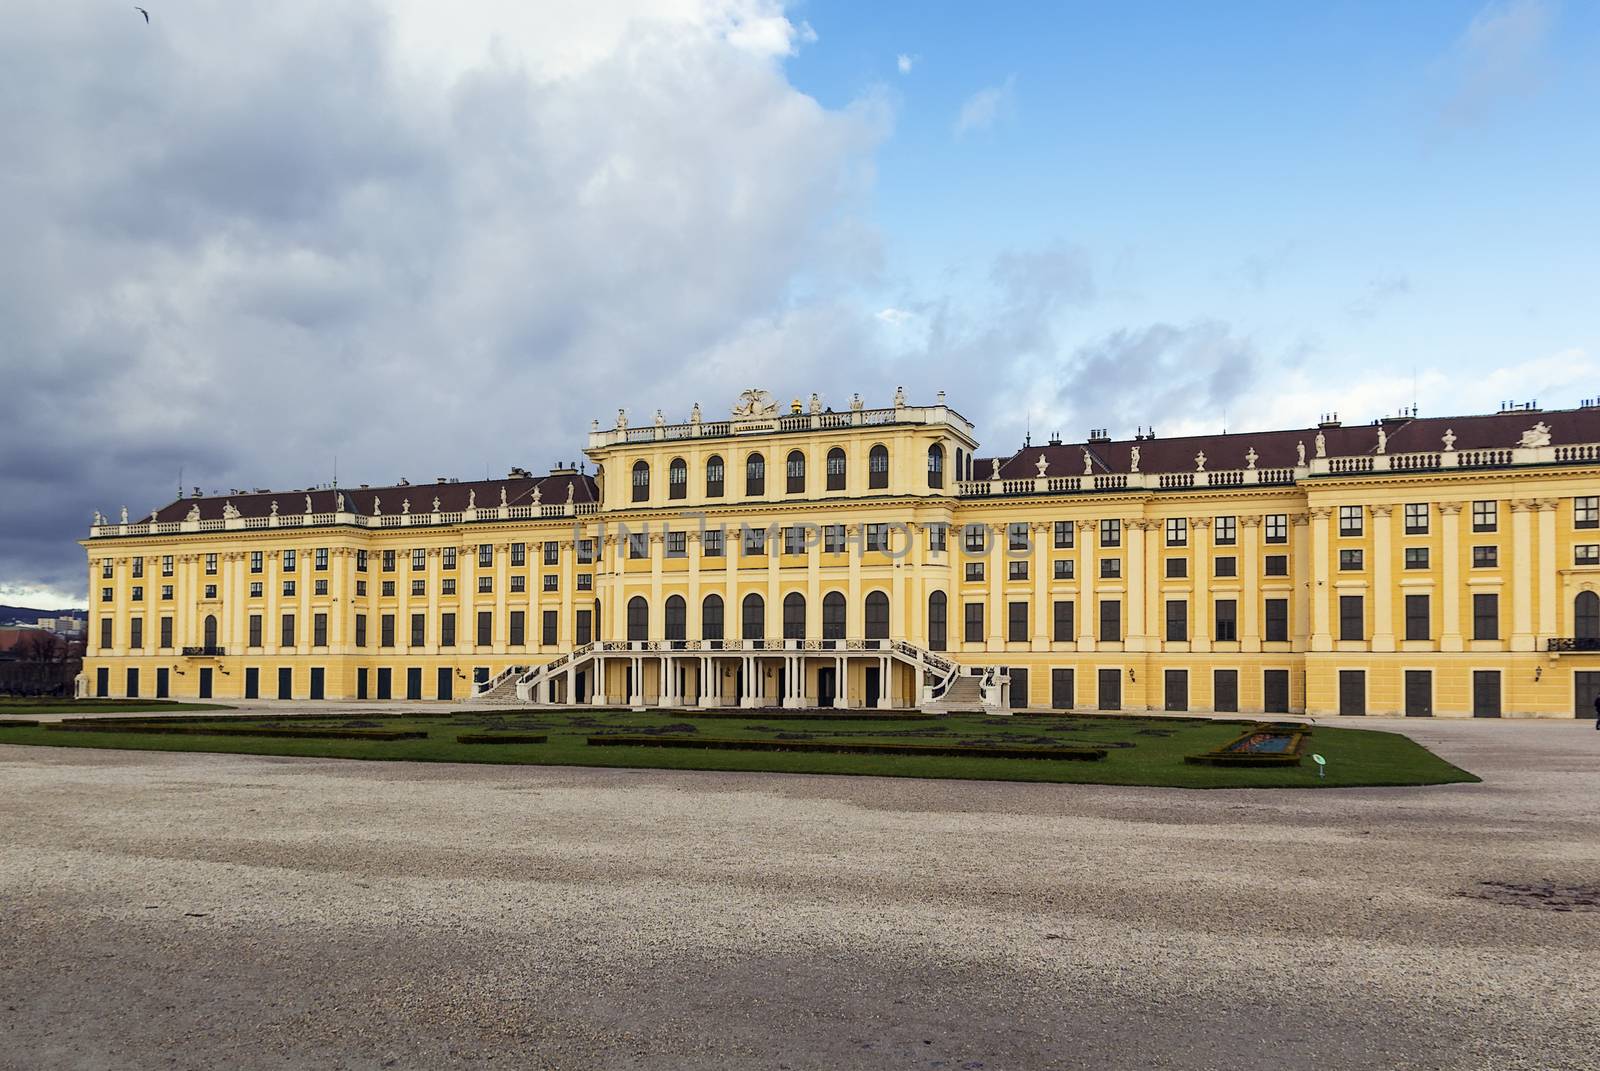 Schonbrunn Palace is a former imperial Rococo summer residence in modern Vienna, Austria.